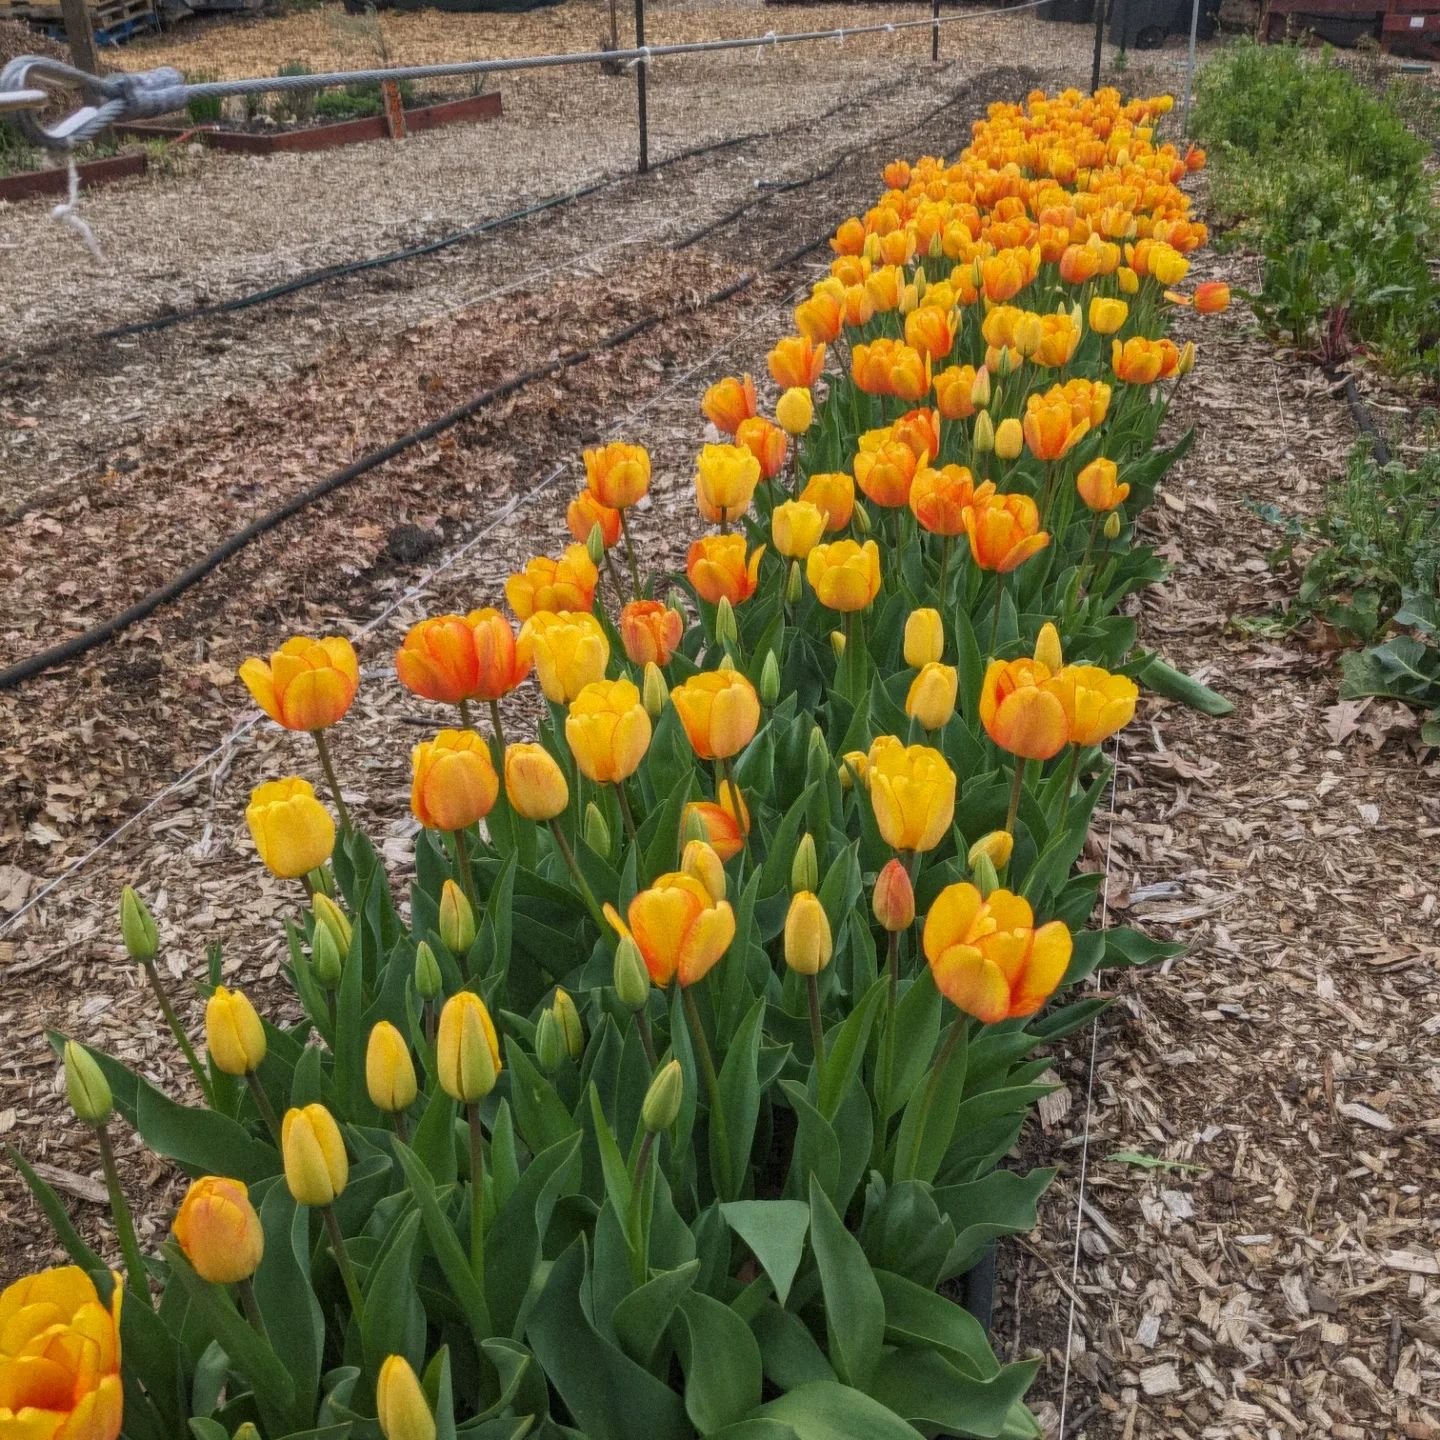 HARVEST ALERT: Come by the farm to harvest tulips, and pick up arugula, sunchokes, cilantro, and carrots! Available in the farm fridge. Produce free to everyone, including neighbors, volunteers, and meme re, as part of our open harvest policy.